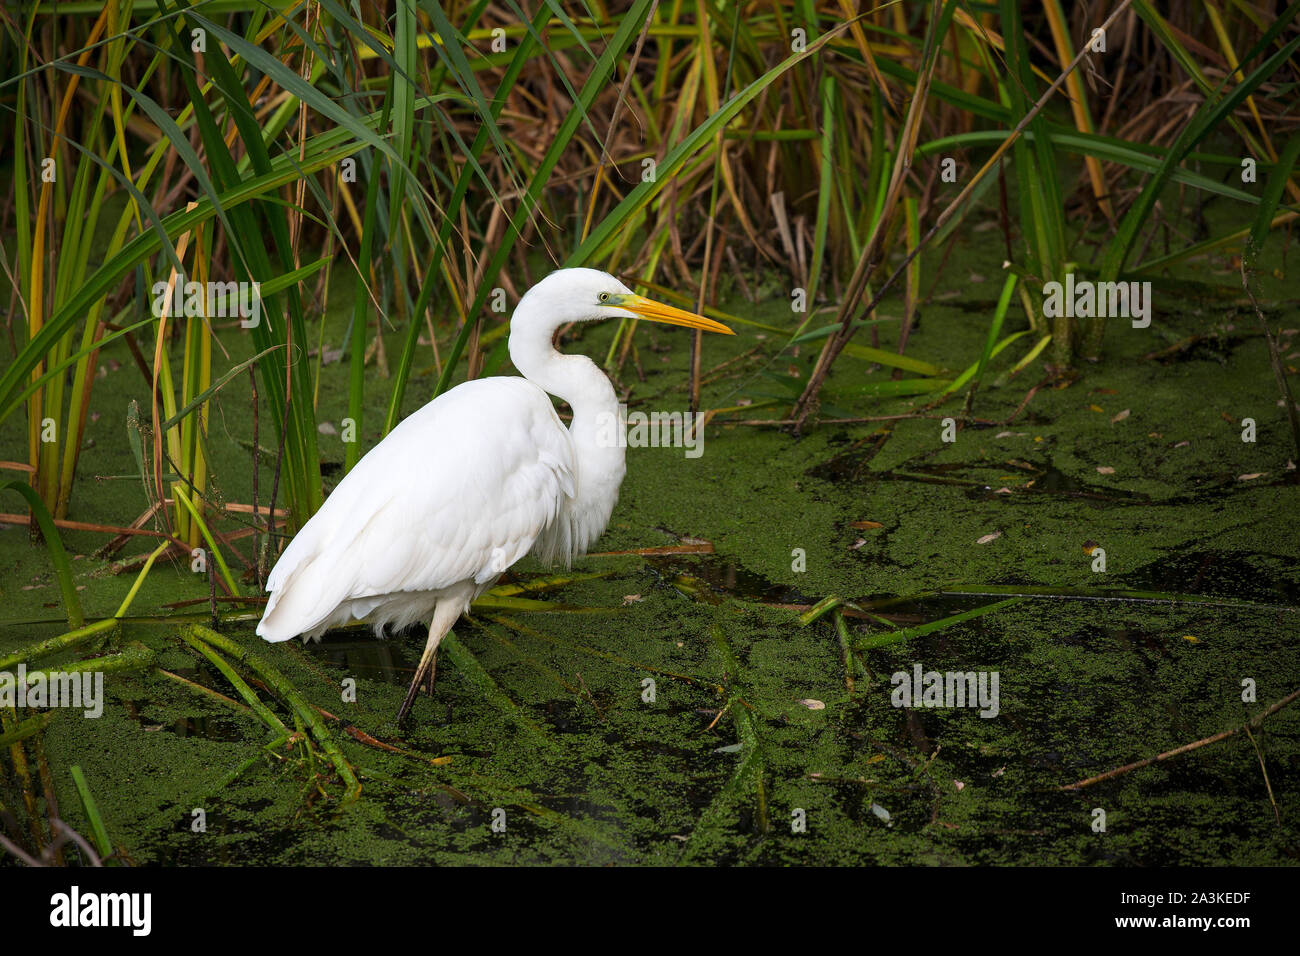 Great egret Egretta alba adult at the edge of a pool, from Noah's Hide, Shapwick Heath National Nature Reserve, Avalon Marshes, Somerset Levels, Engla Stock Photo